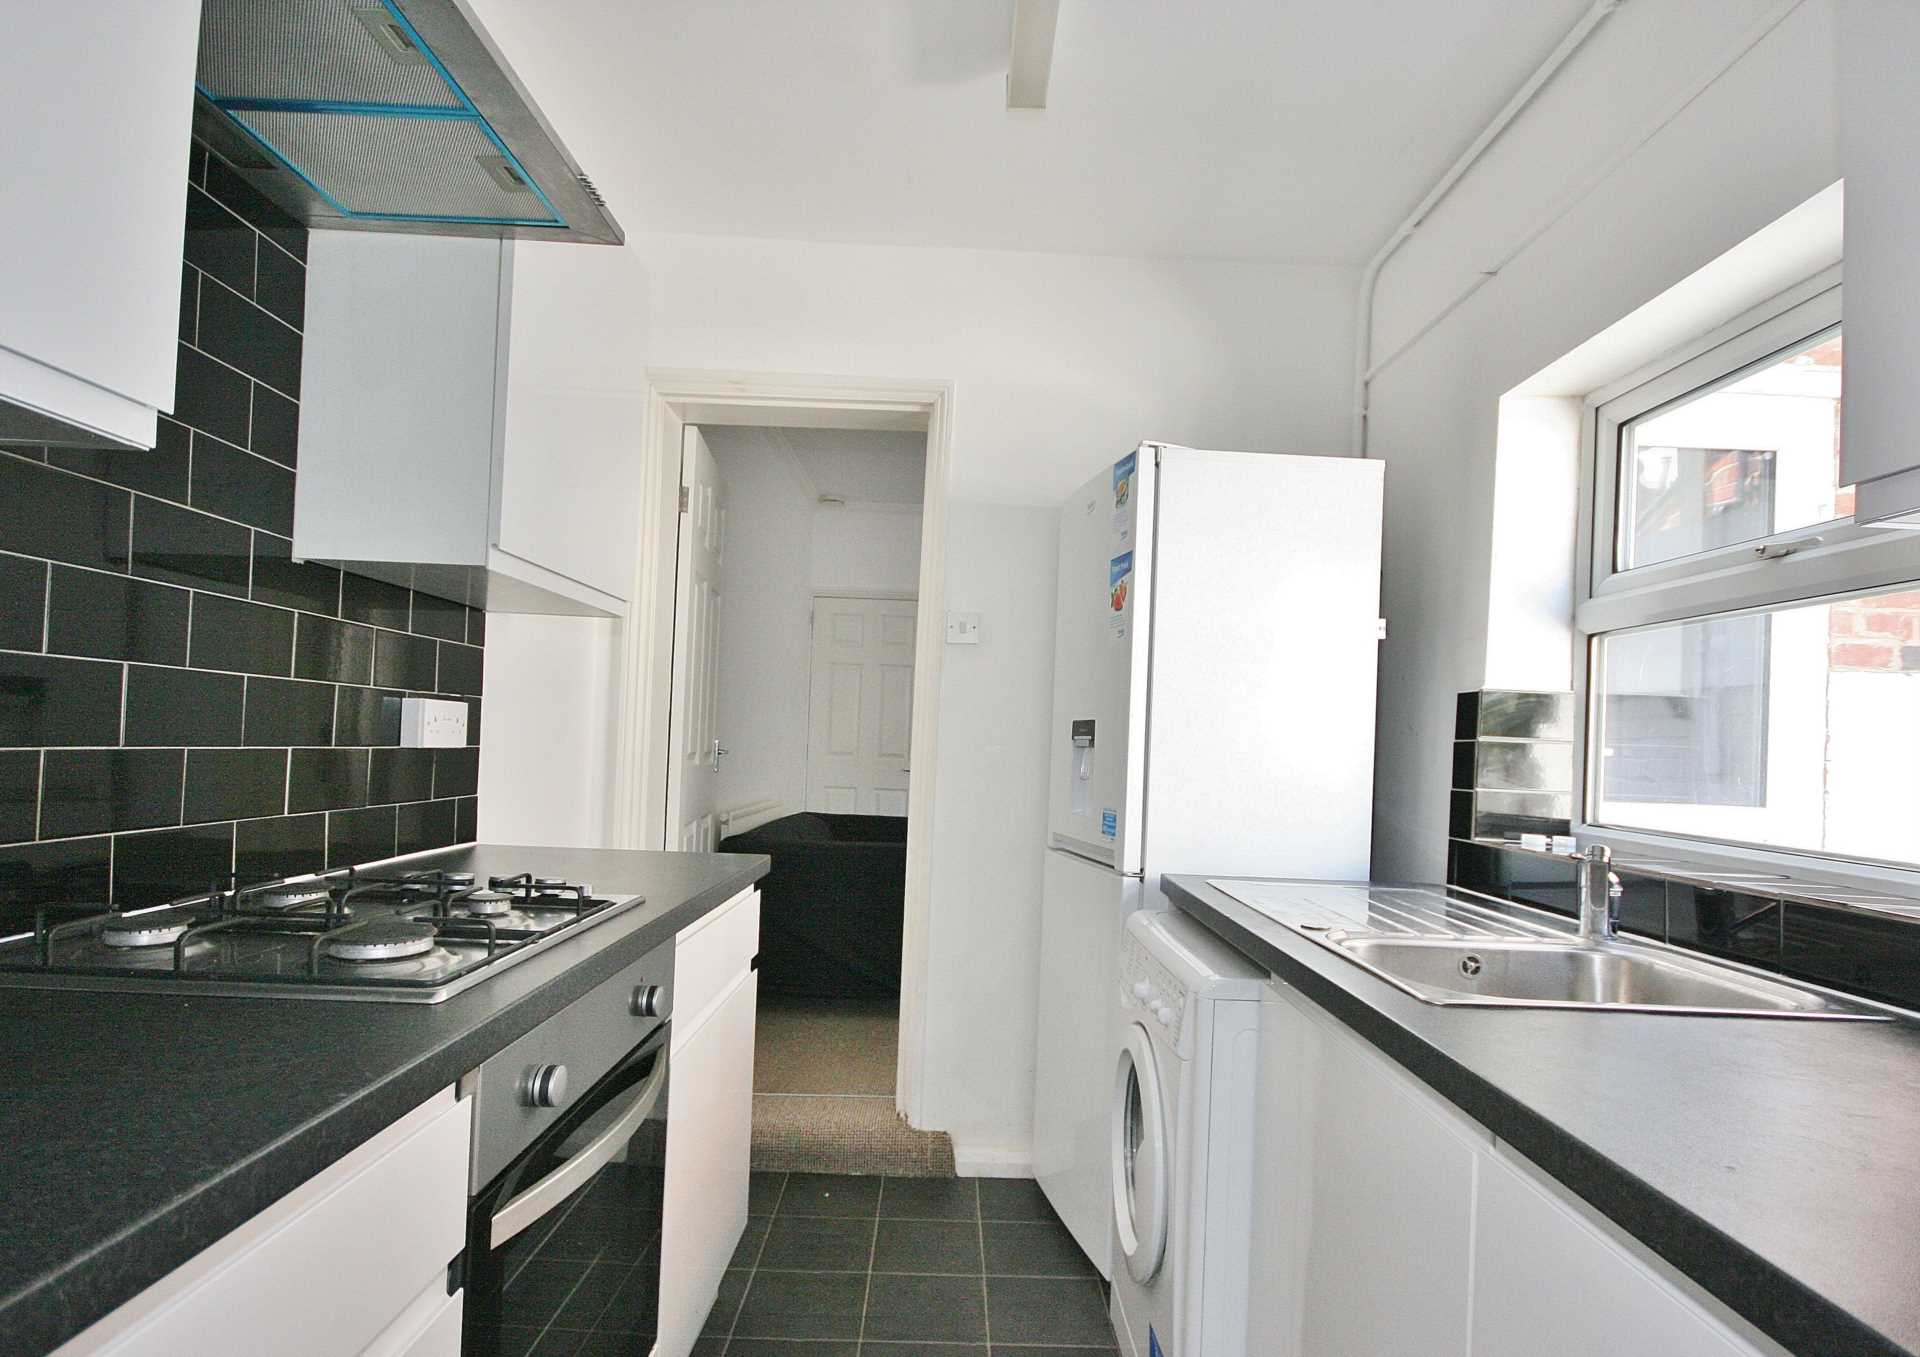 3 Bed- Filey Road, Reading, Image 2